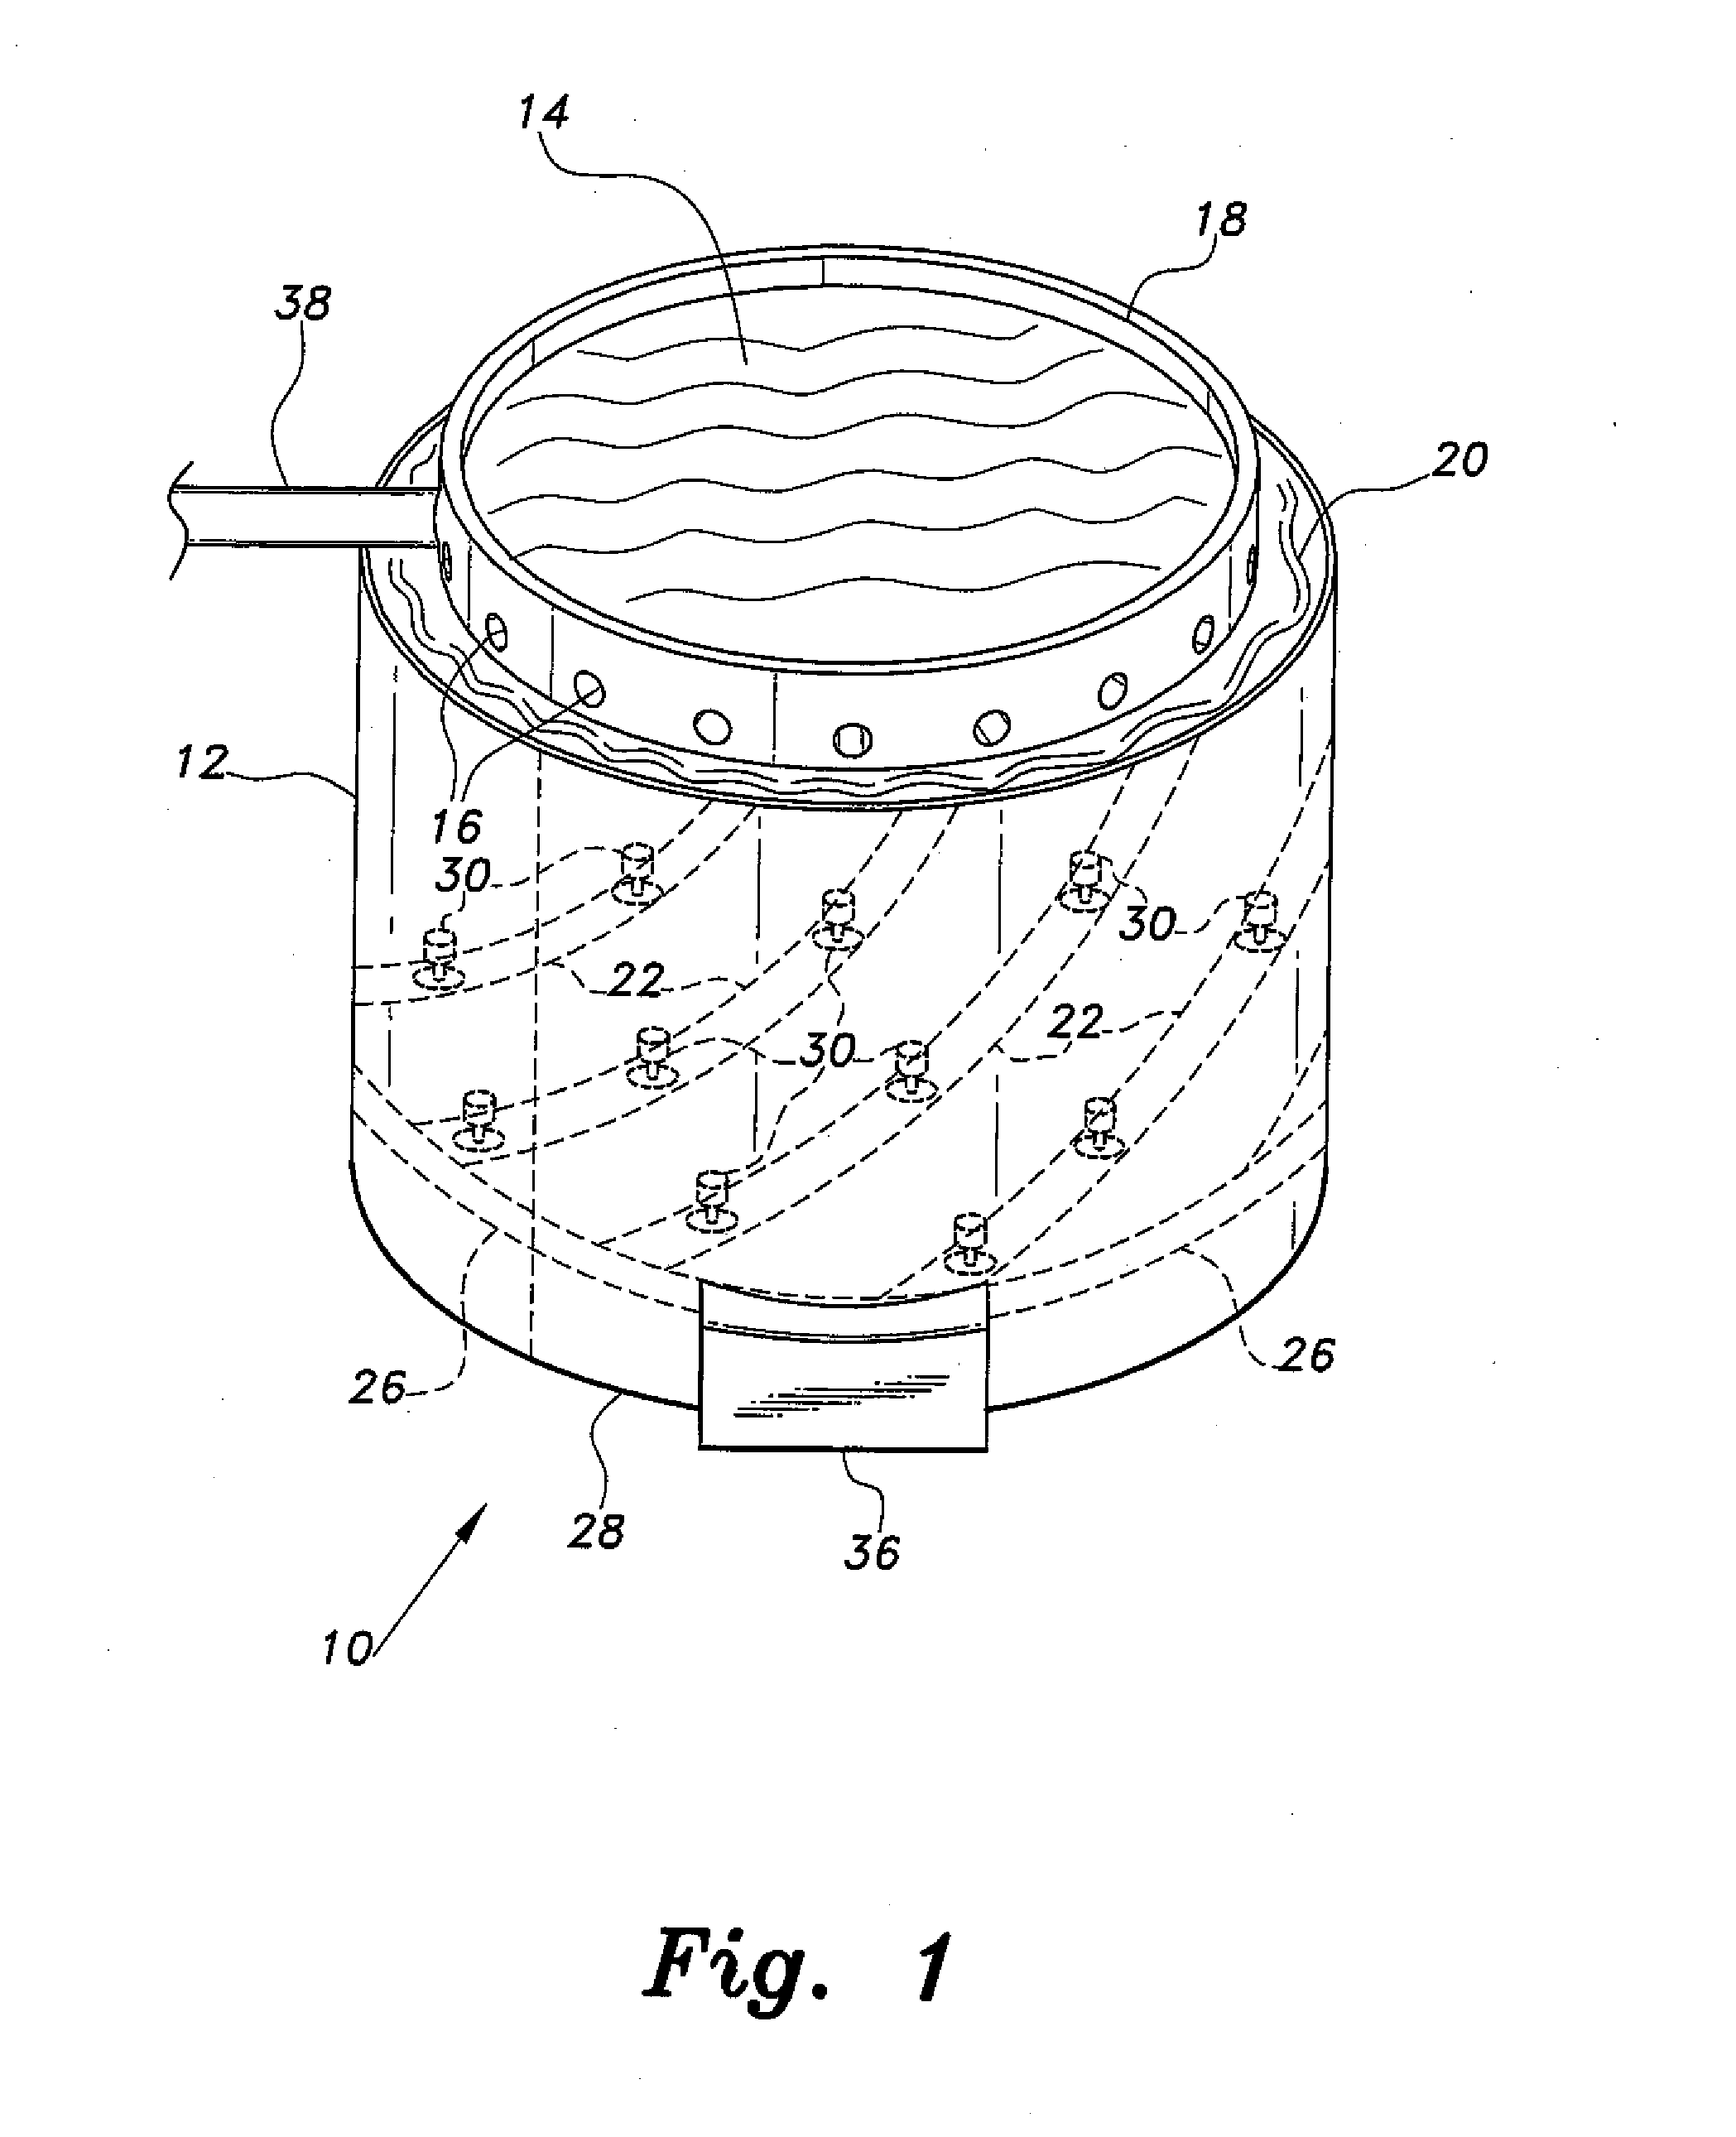 Hydroelectric power generating system